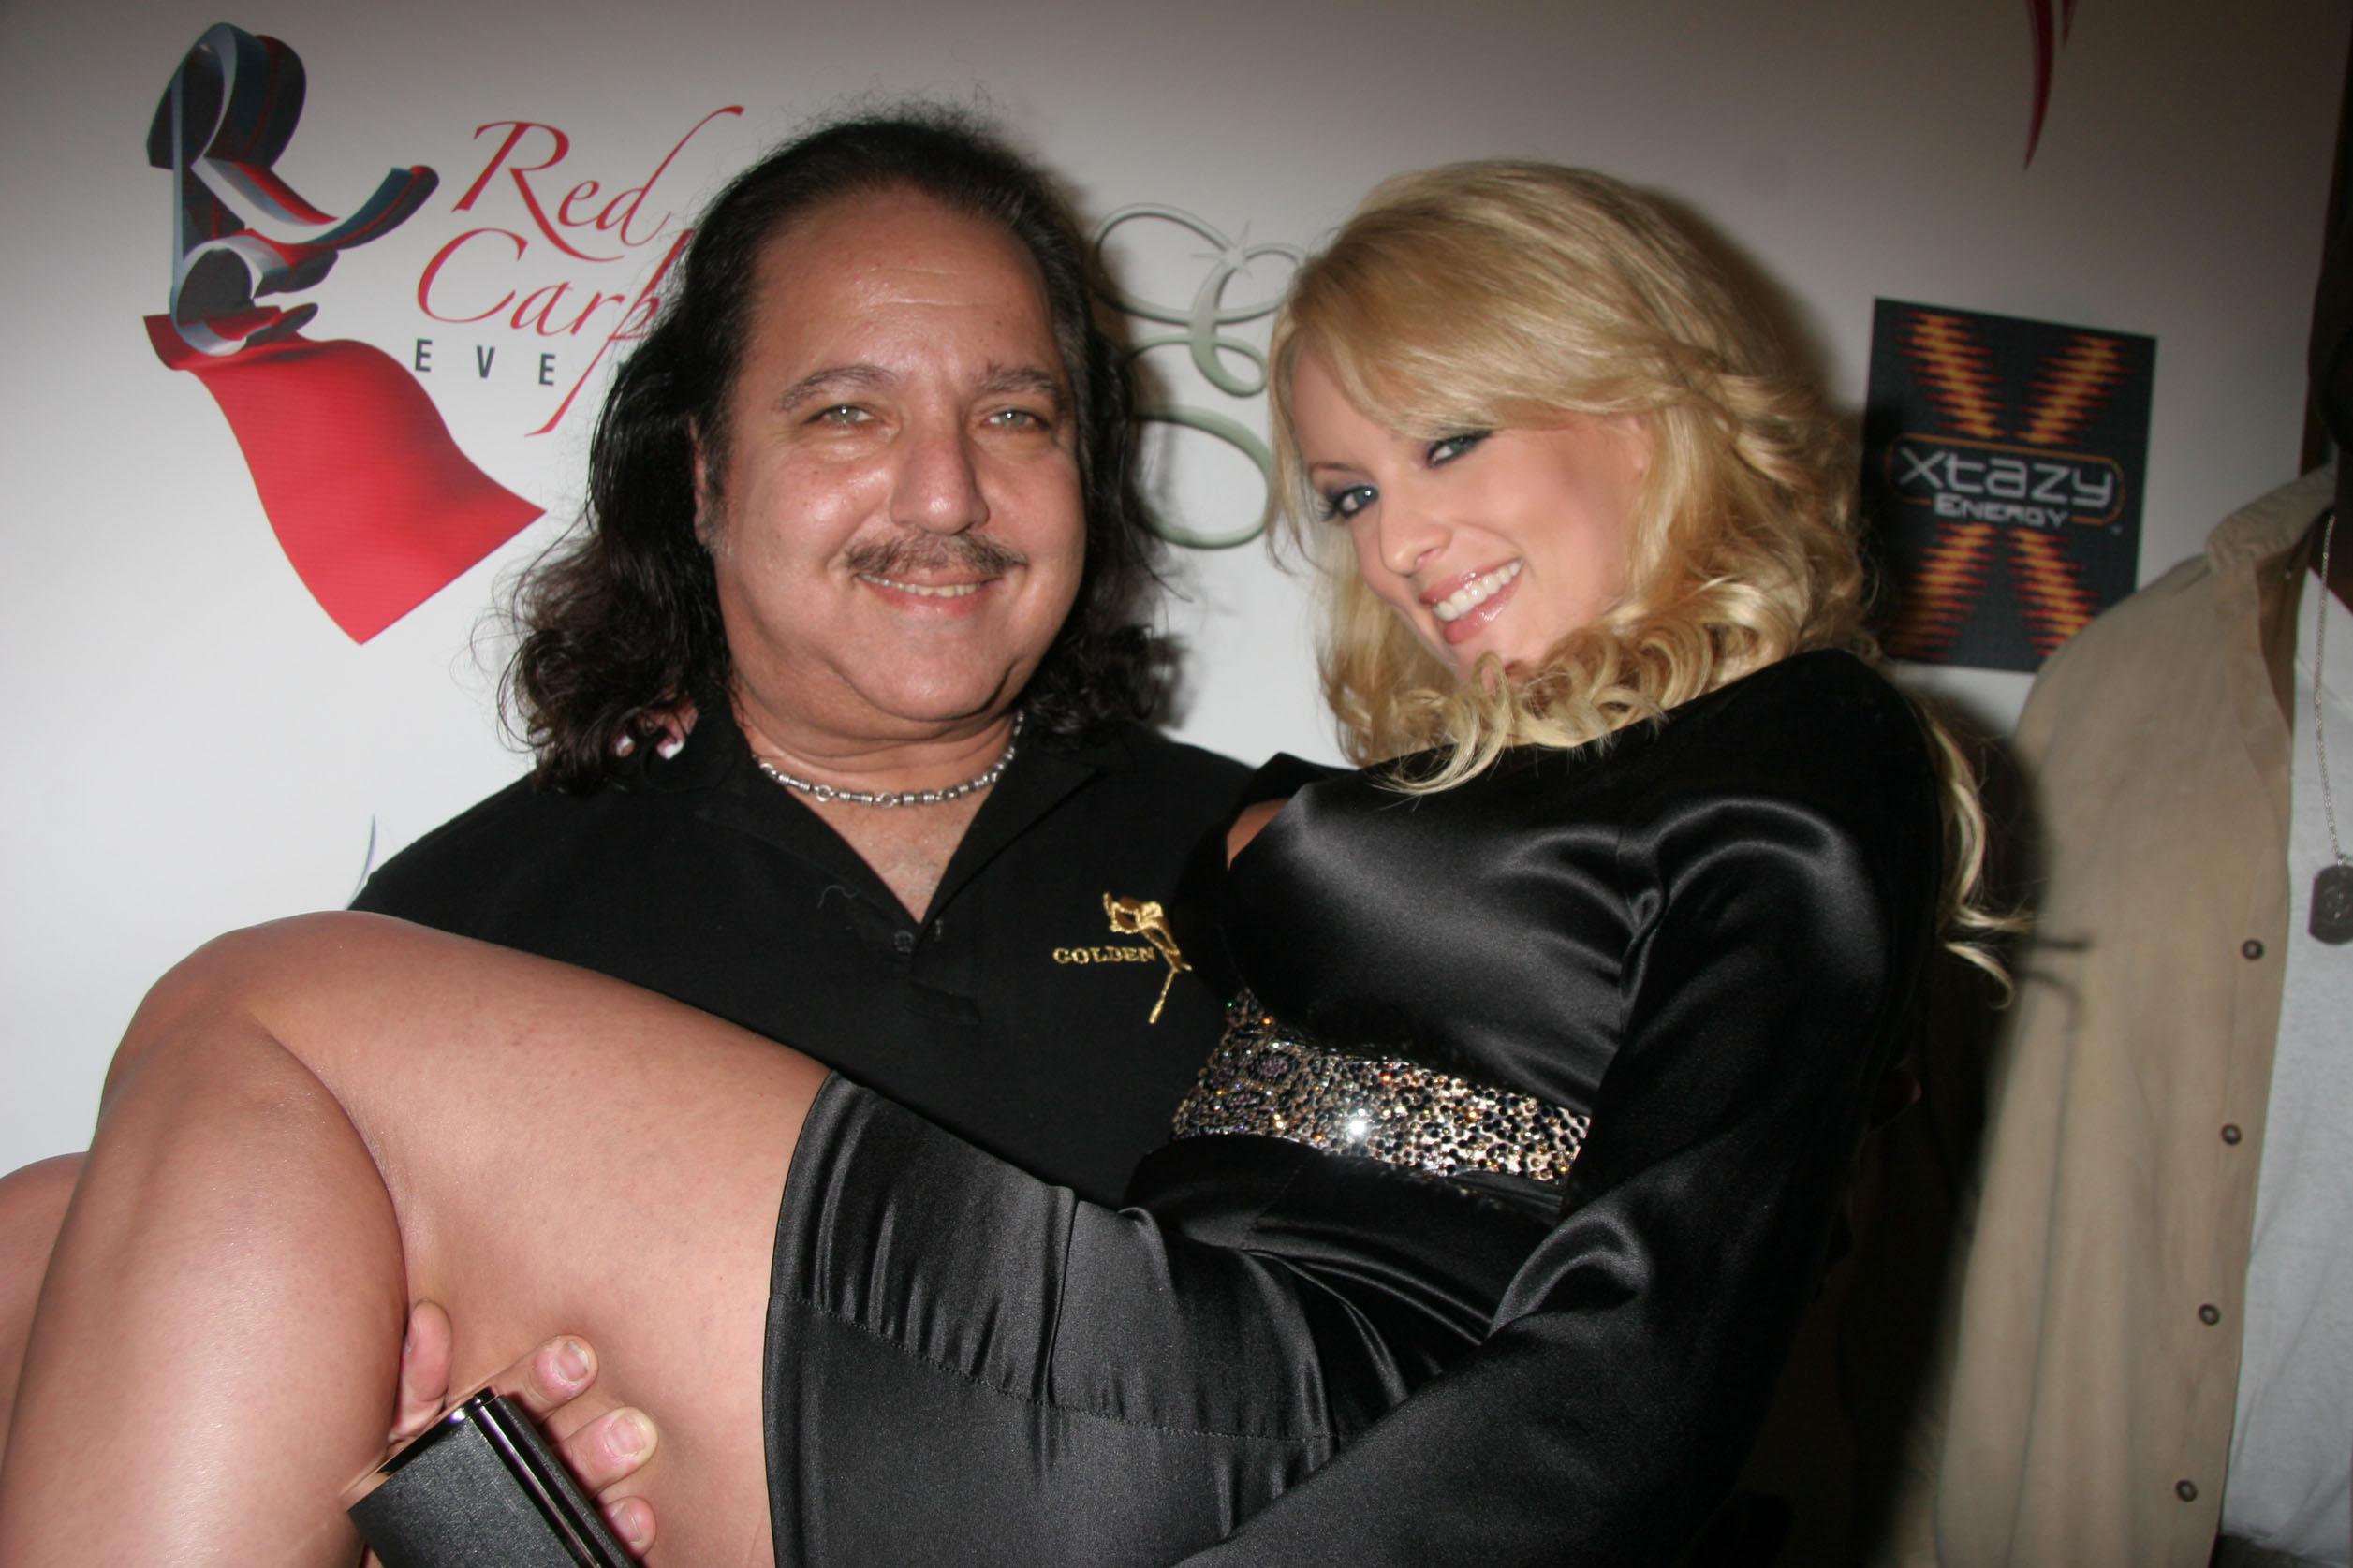 da jerk recommends young ron jeremy nude pic